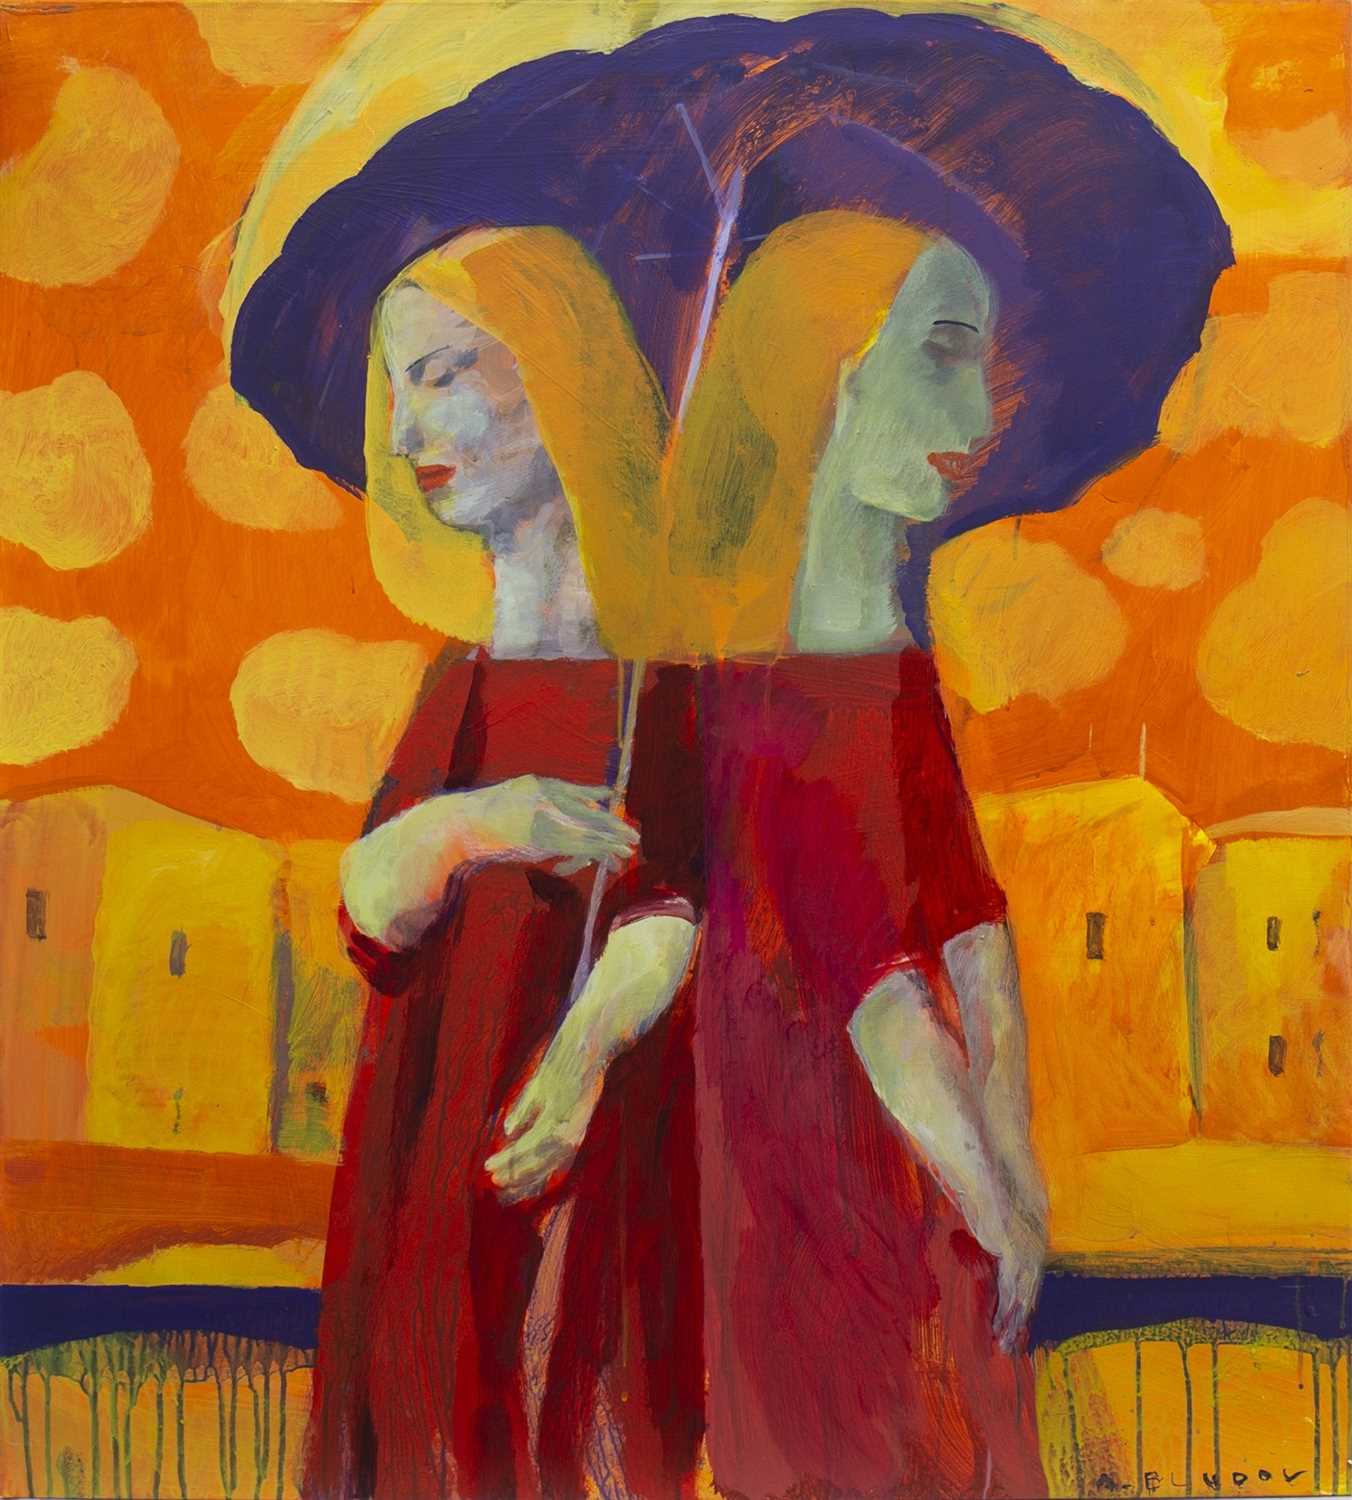 Lot 579 - COUPLE UNDER THE RAIN, AN OIL BY ANDREI BLUDOV